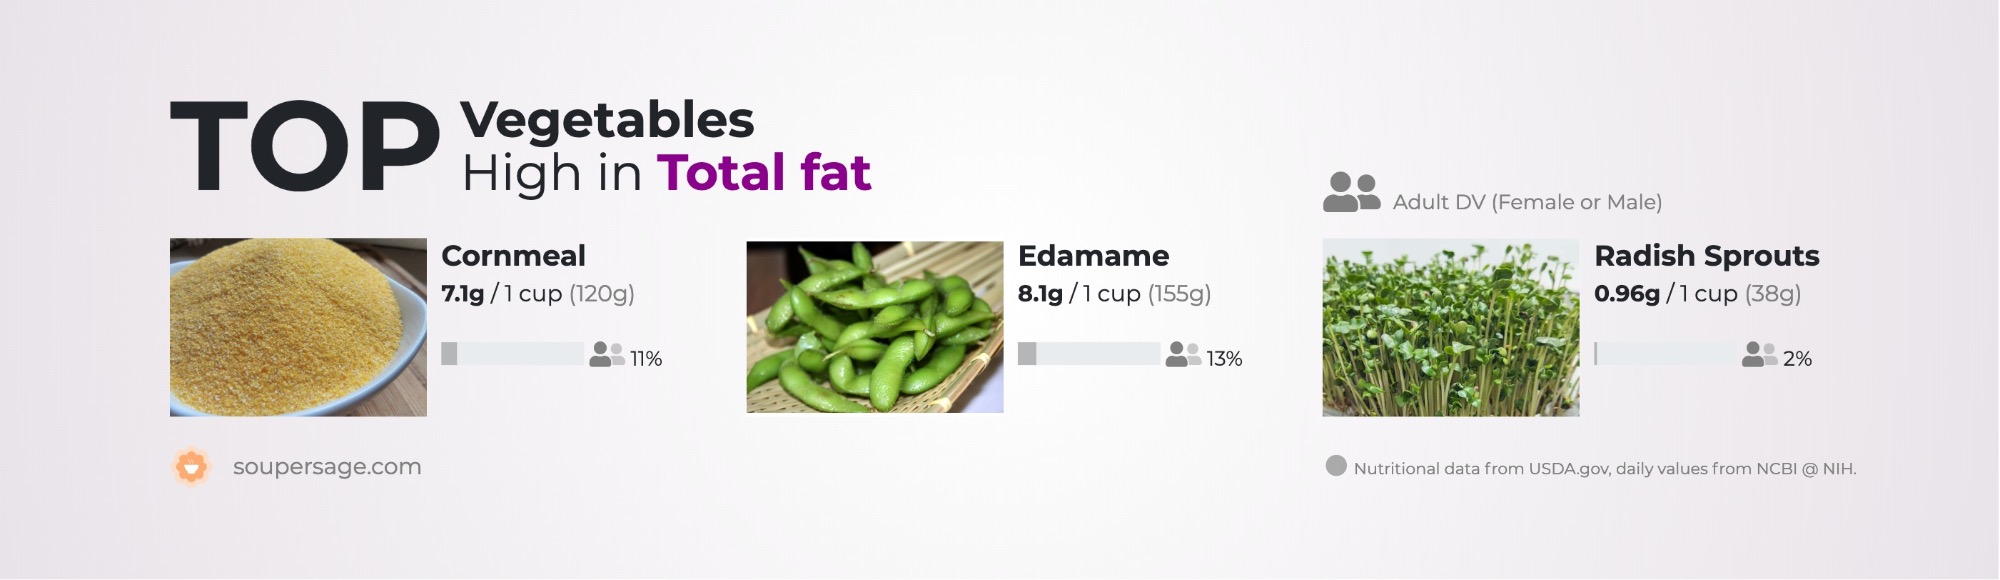 image of Top Vegetables High in Total fat